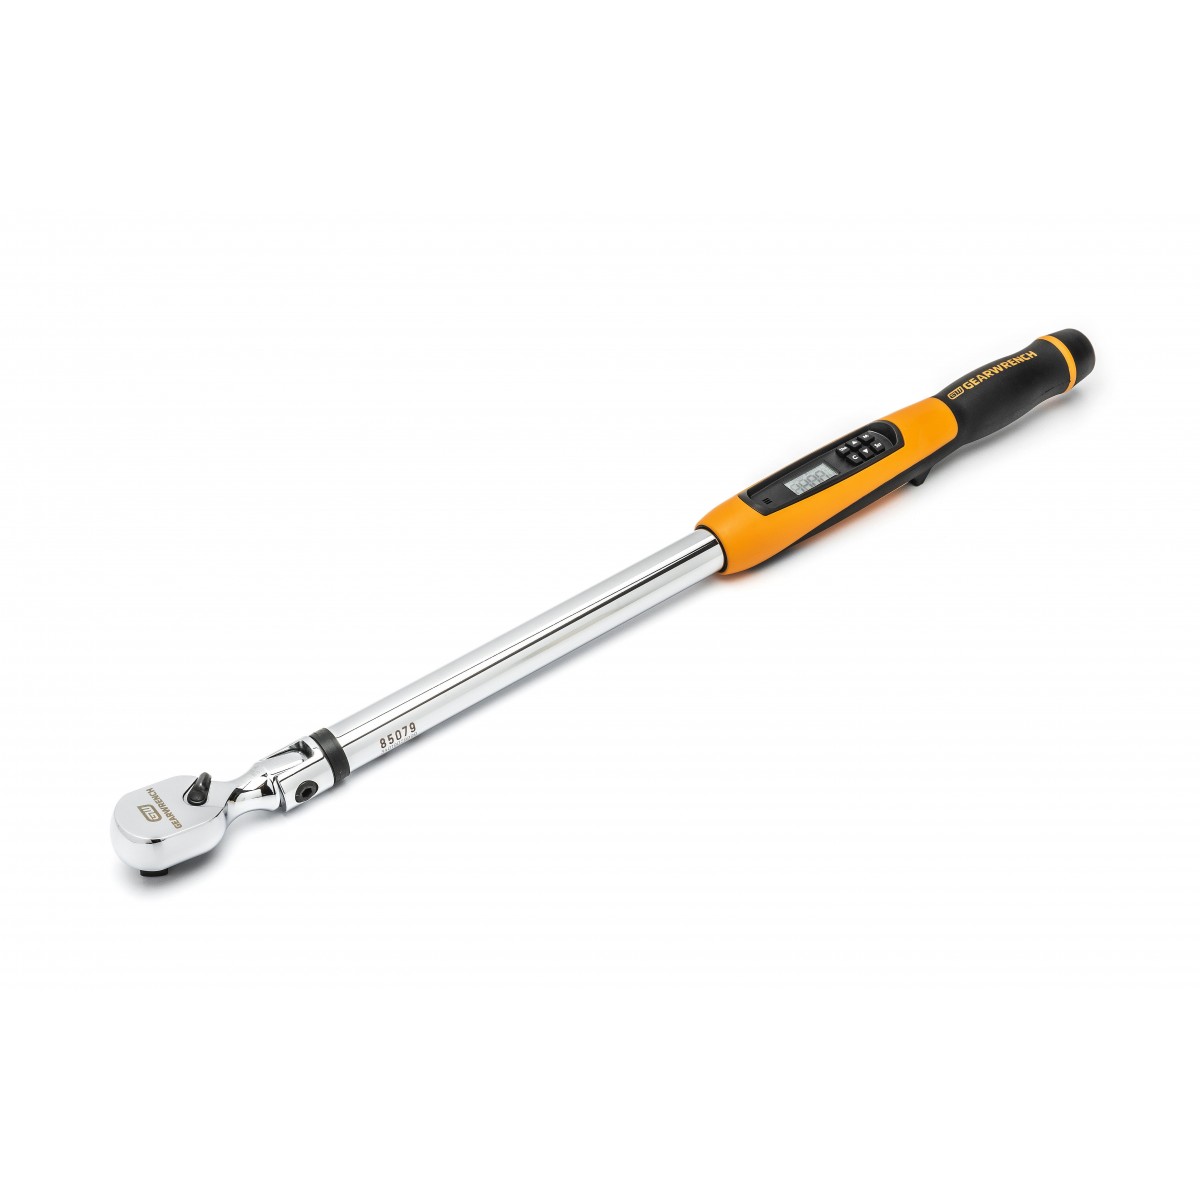 1/2" FLEX HEAD ELECTRONIC TORQUE WRENCH WITH ANGLE 25-250 FT/LBS